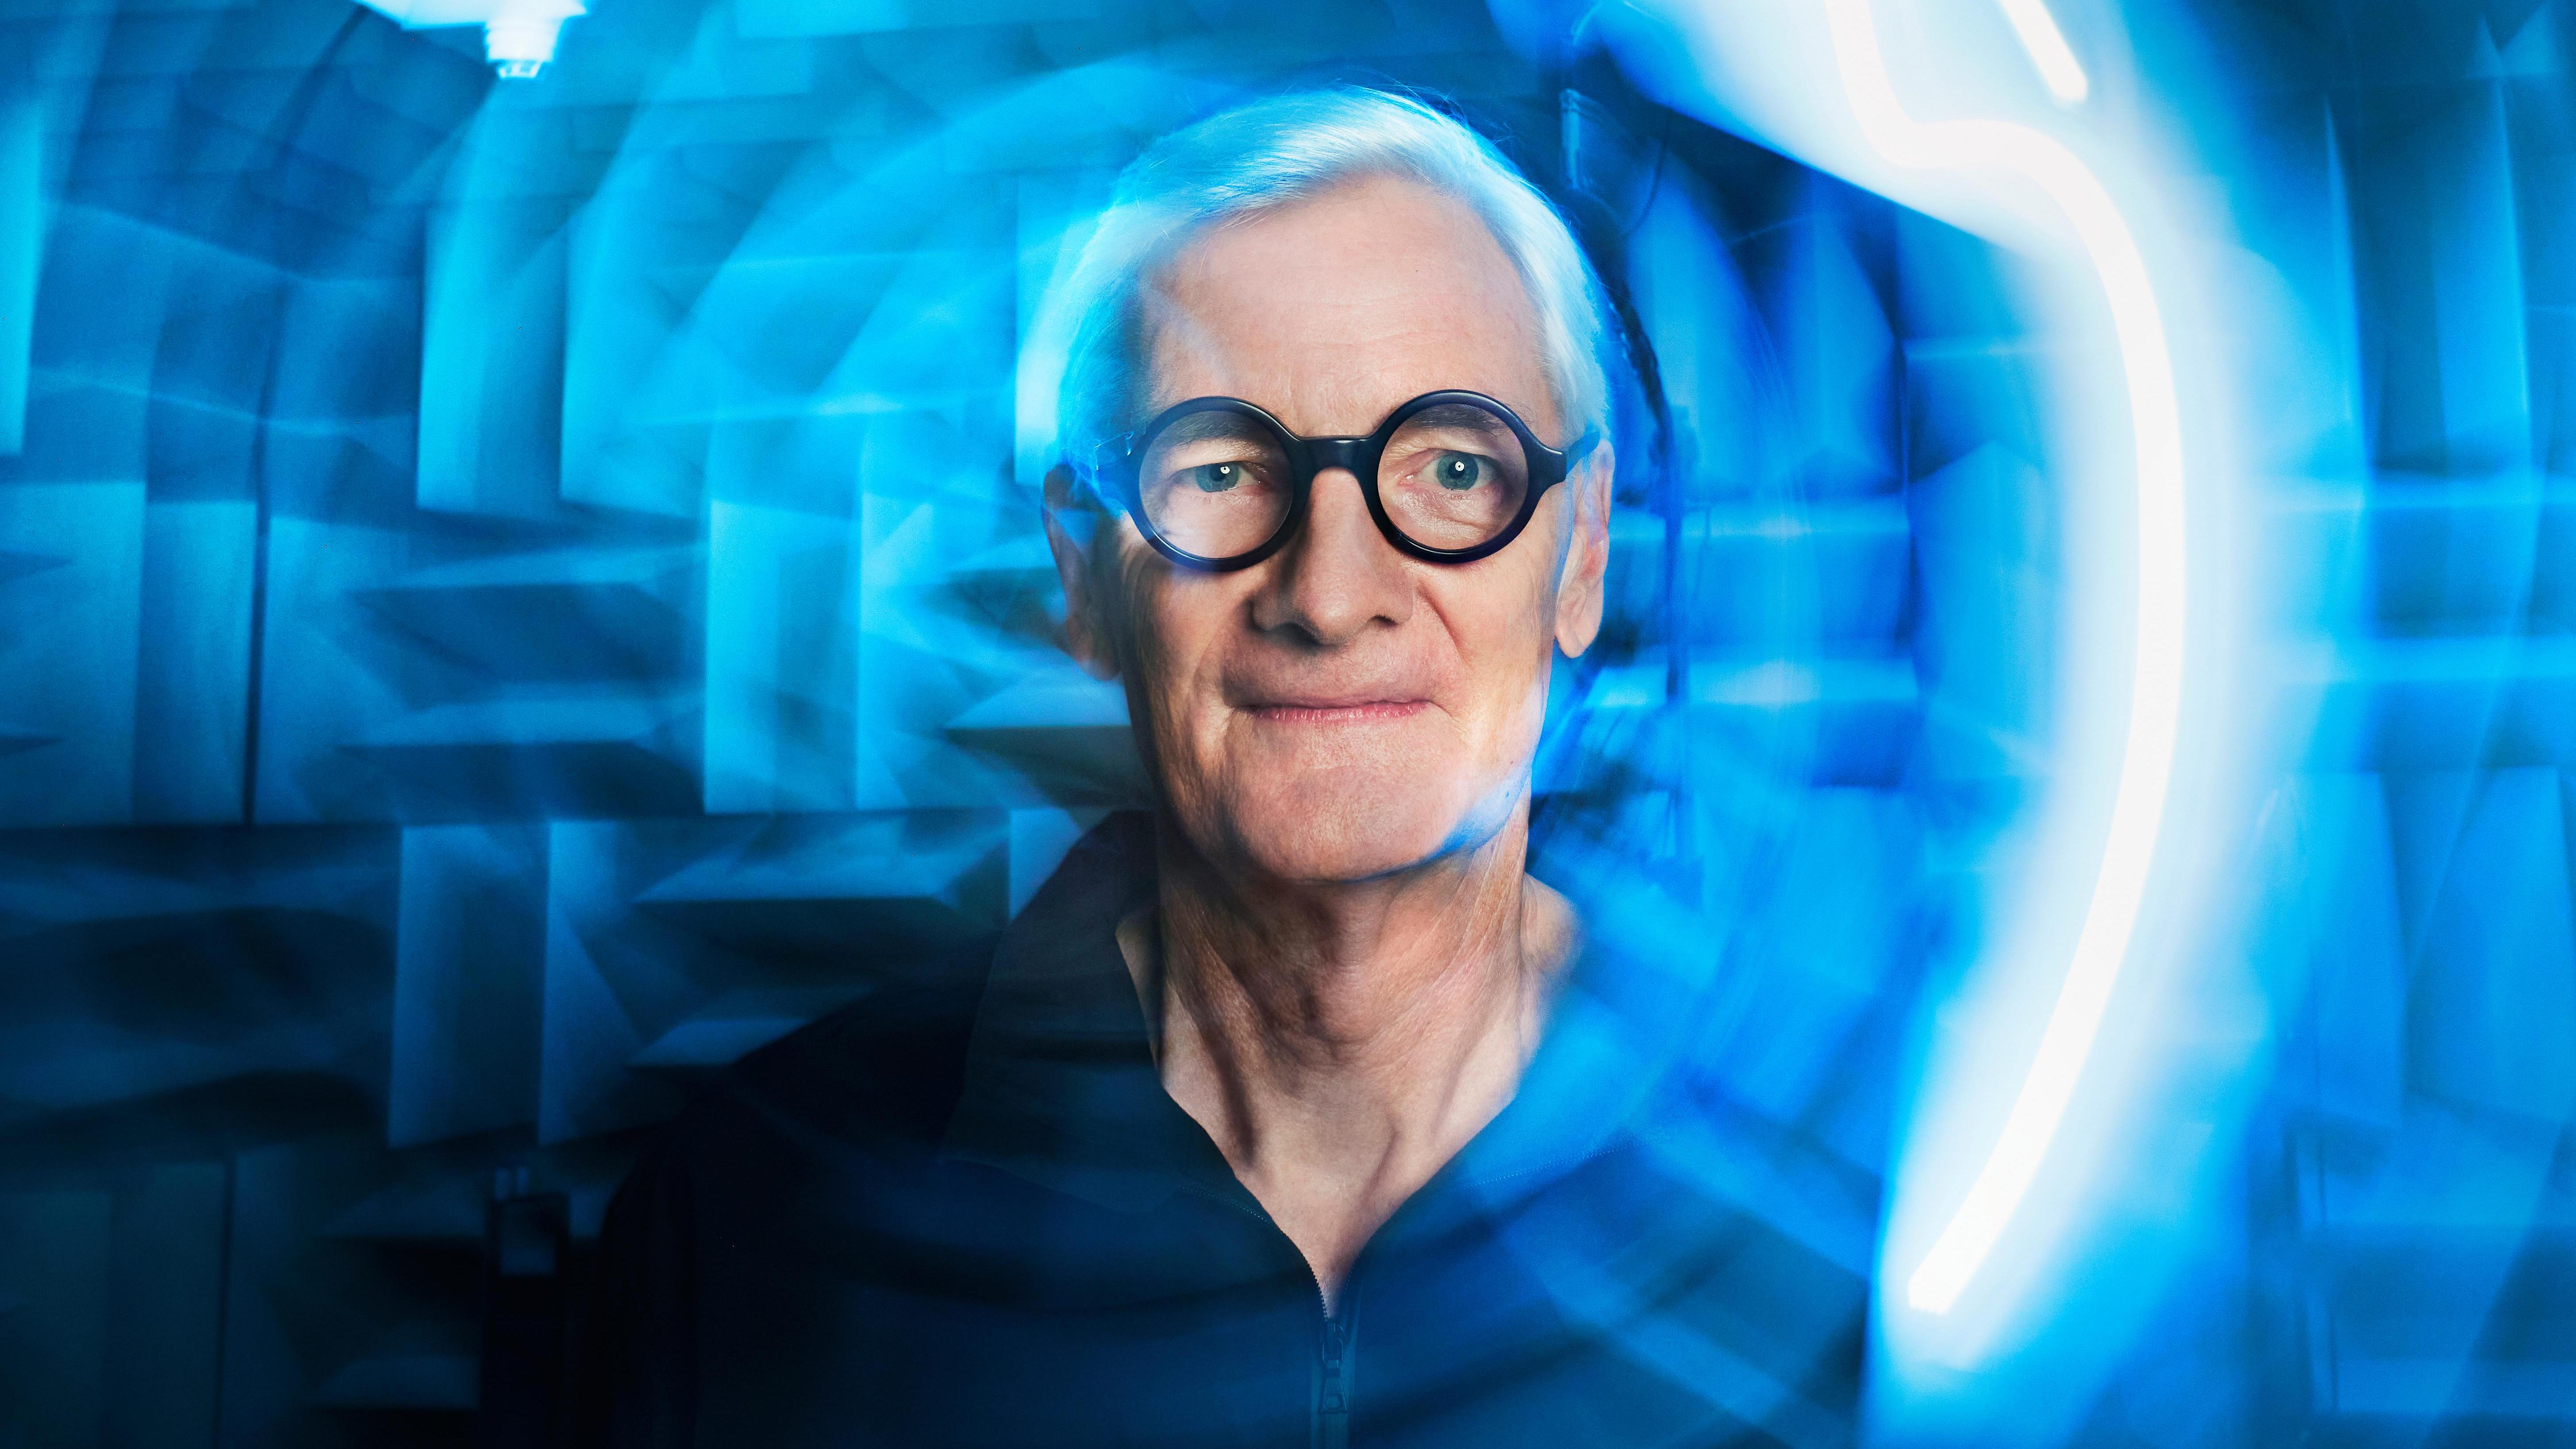 Sir James Dyson employs about 3,500 people in the UK and is further expanding operations here